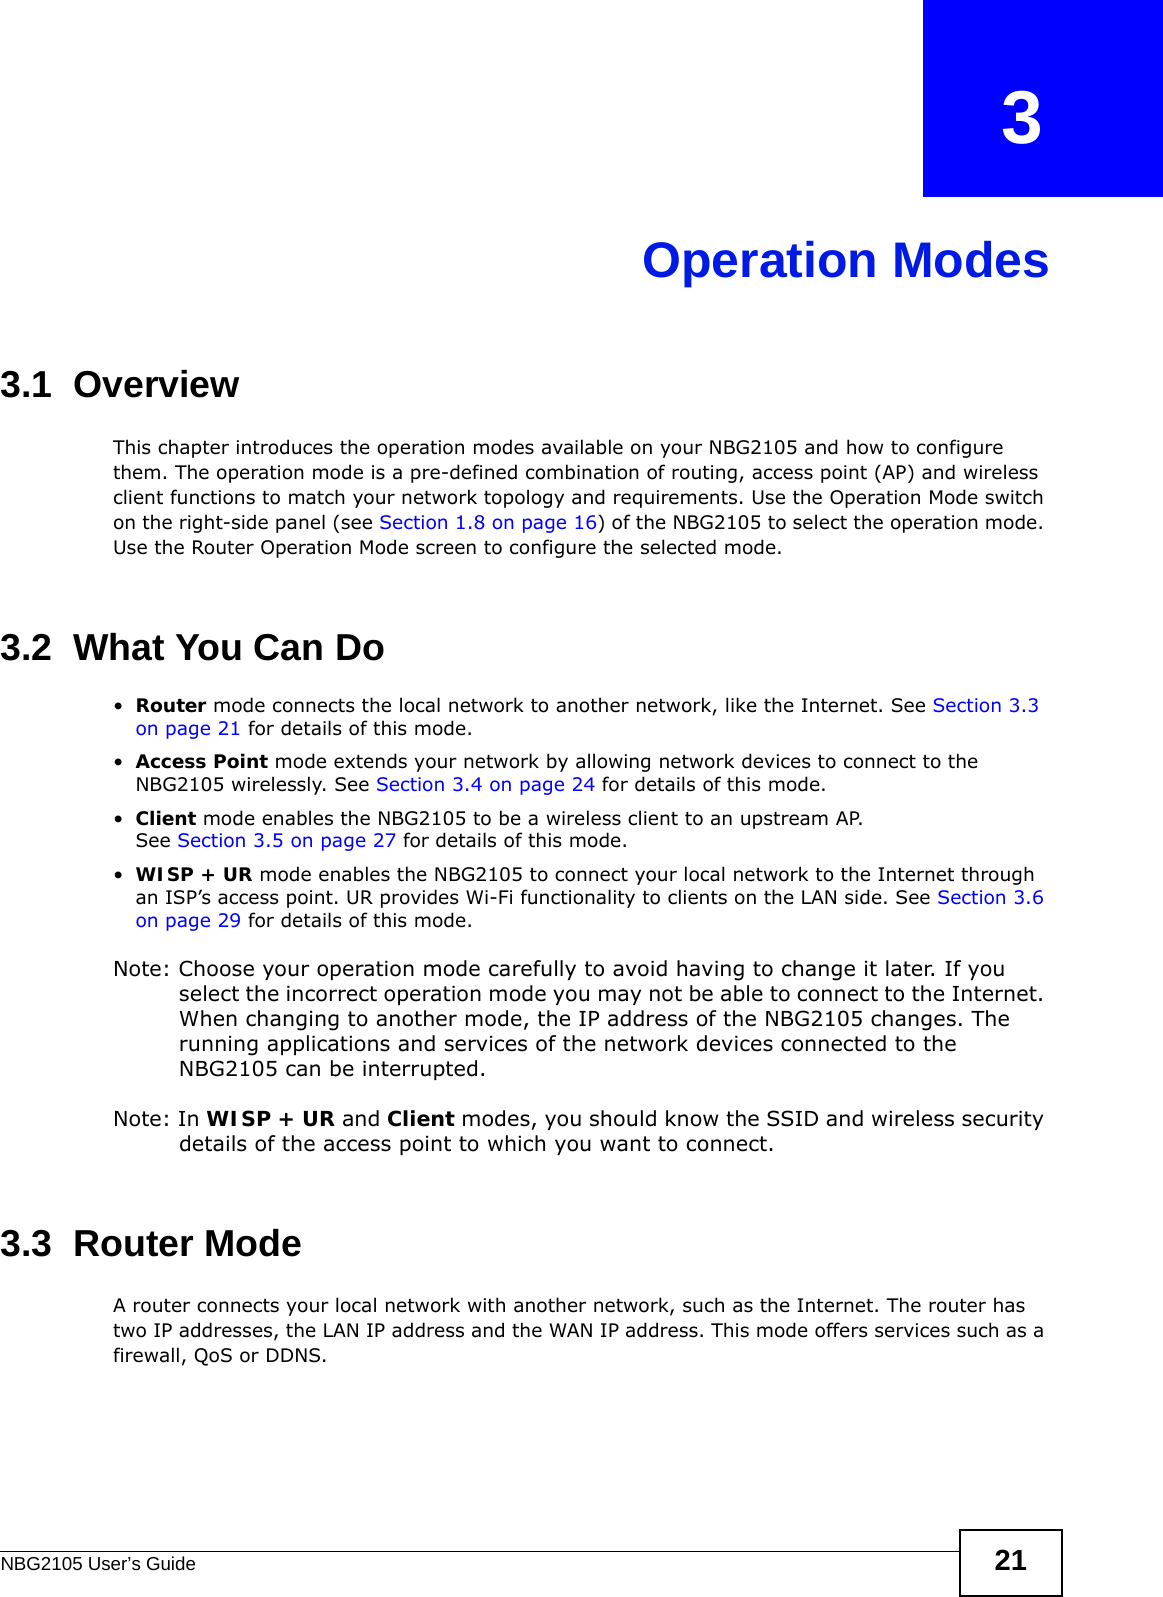 NBG2105 User’s Guide 21CHAPTER   3Operation Modes3.1  OverviewThis chapter introduces the operation modes available on your NBG2105 and how to configure them. The operation mode is a pre-defined combination of routing, access point (AP) and wireless client functions to match your network topology and requirements. Use the Operation Mode switch on the right-side panel (see Section 1.8 on page 16) of the NBG2105 to select the operation mode. Use the Router Operation Mode screen to configure the selected mode.3.2  What You Can Do•Router mode connects the local network to another network, like the Internet. See Section 3.3 on page 21 for details of this mode.•Access Point mode extends your network by allowing network devices to connect to the NBG2105 wirelessly. See Section 3.4 on page 24 for details of this mode.•Client mode enables the NBG2105 to be a wireless client to an upstream AP.See Section 3.5 on page 27 for details of this mode.•WISP + UR mode enables the NBG2105 to connect your local network to the Internet through an ISP’s access point. UR provides Wi-Fi functionality to clients on the LAN side. See Section 3.6 on page 29 for details of this mode.Note: Choose your operation mode carefully to avoid having to change it later. If you select the incorrect operation mode you may not be able to connect to the Internet. When changing to another mode, the IP address of the NBG2105 changes. The running applications and services of the network devices connected to the NBG2105 can be interrupted. Note: In WISP + UR and Client modes, you should know the SSID and wireless security details of the access point to which you want to connect.3.3  Router ModeA router connects your local network with another network, such as the Internet. The router has two IP addresses, the LAN IP address and the WAN IP address. This mode offers services such as a firewall, QoS or DDNS.